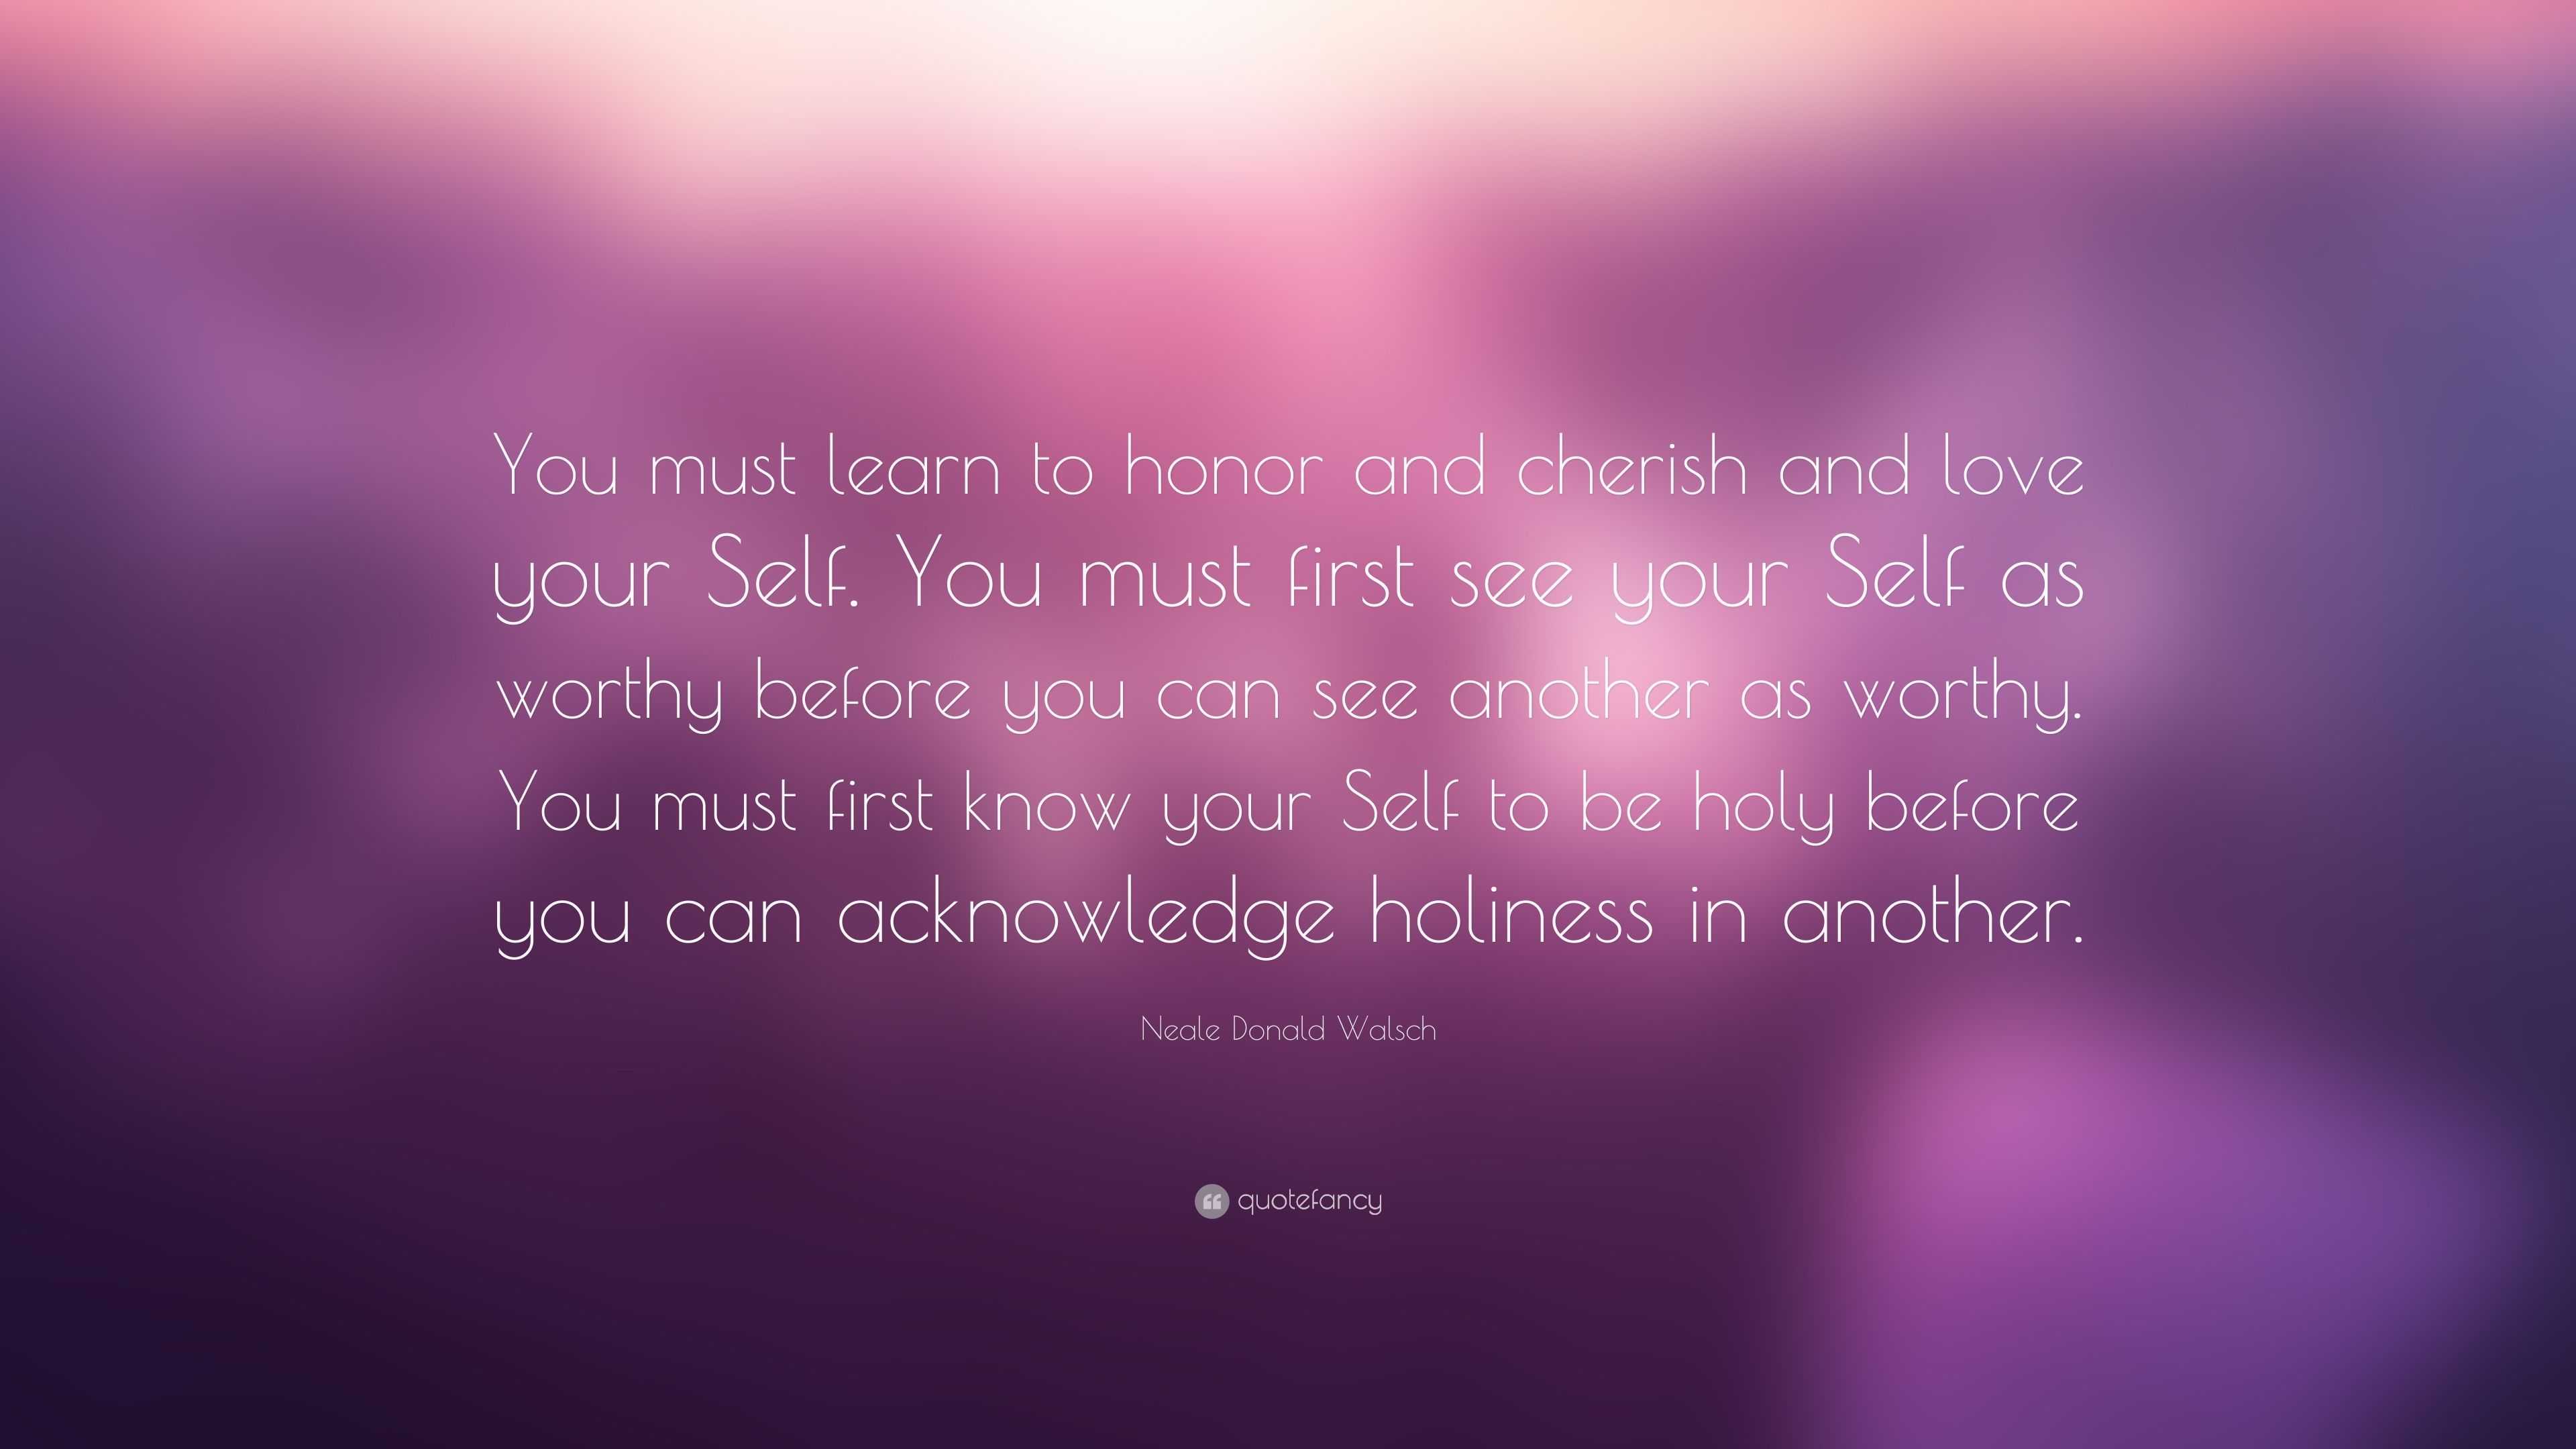 Neale Donald Walsch Quote: “You must learn to honor and cherish and ...